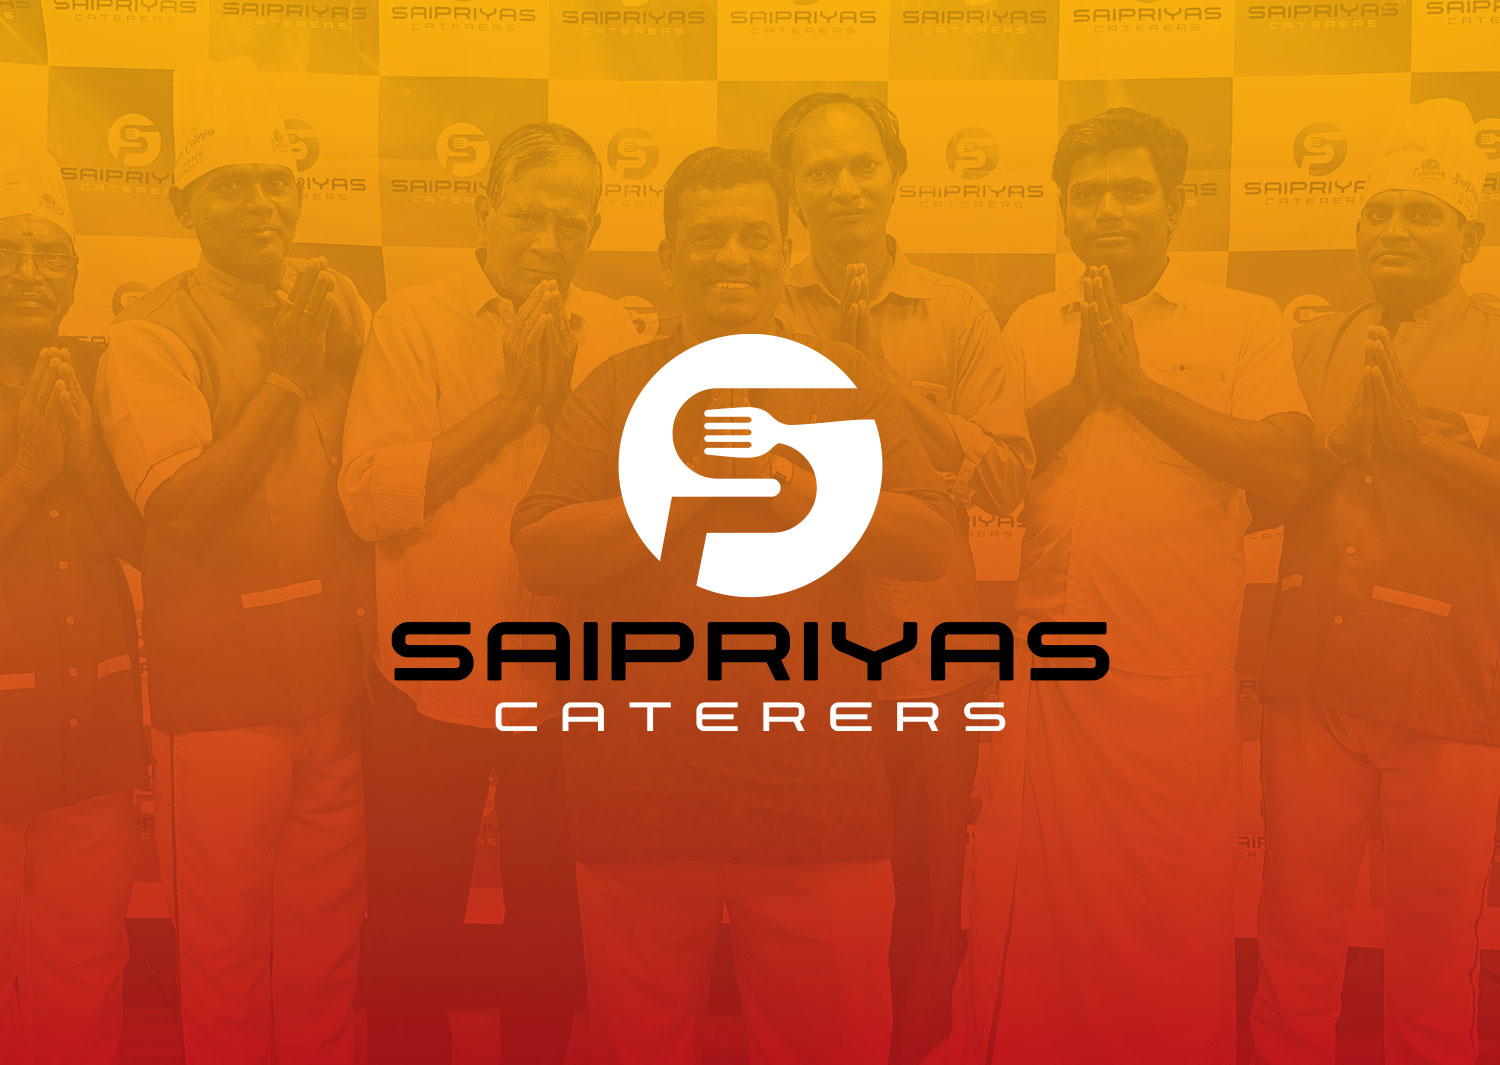 Saipriyas Cateres: Dsignxt's Creative Excellence in Brand Elevation